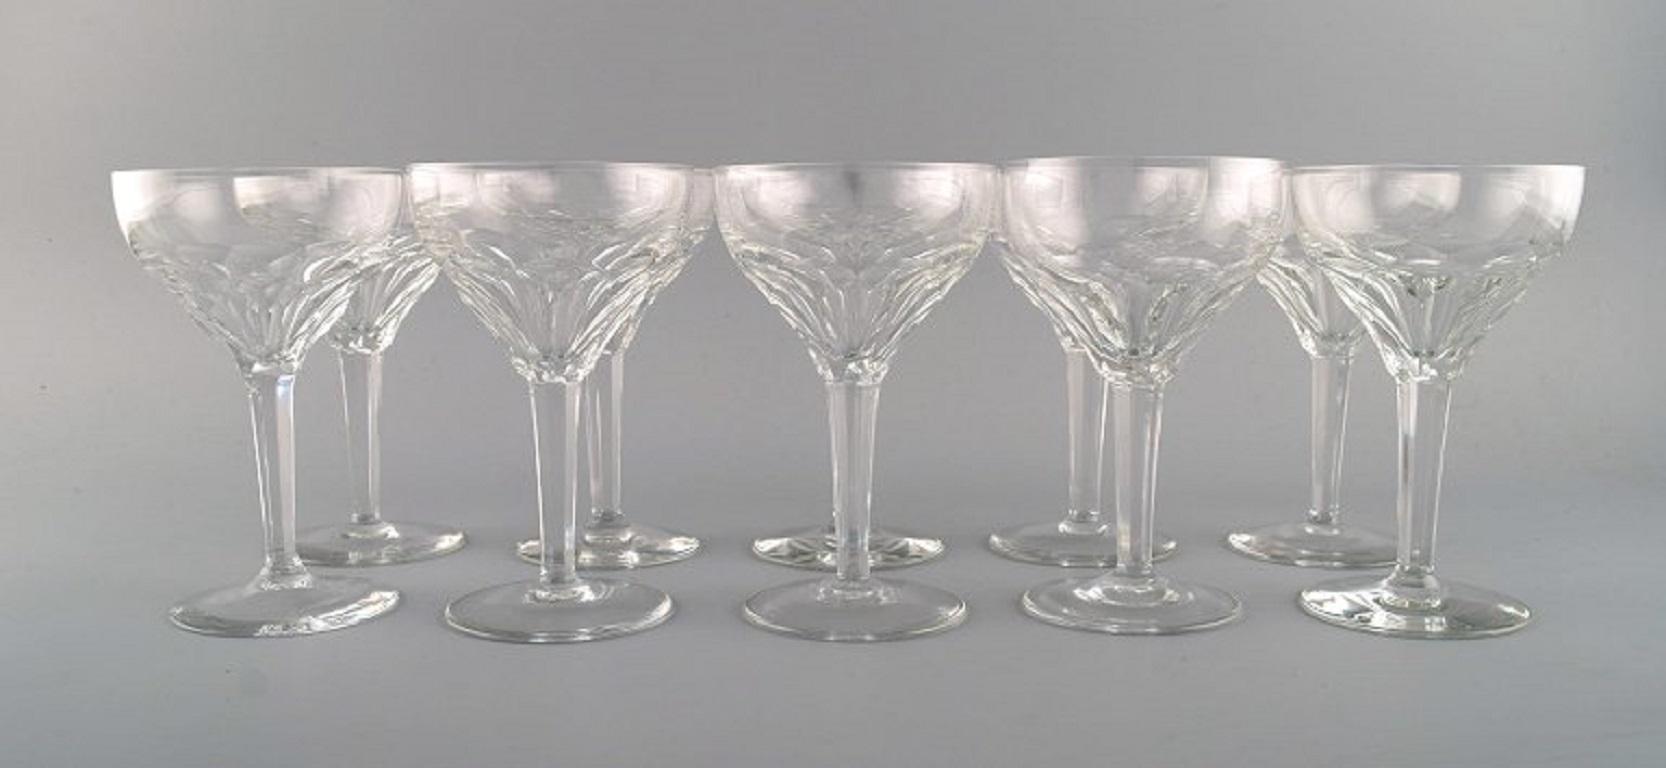 Val St. Lambert, Belgium. Ten red wine glasses in clear mouth-blown crystal glass. 1930s.
Measures: 15.6 x 9.8 cm
In perfect condition.